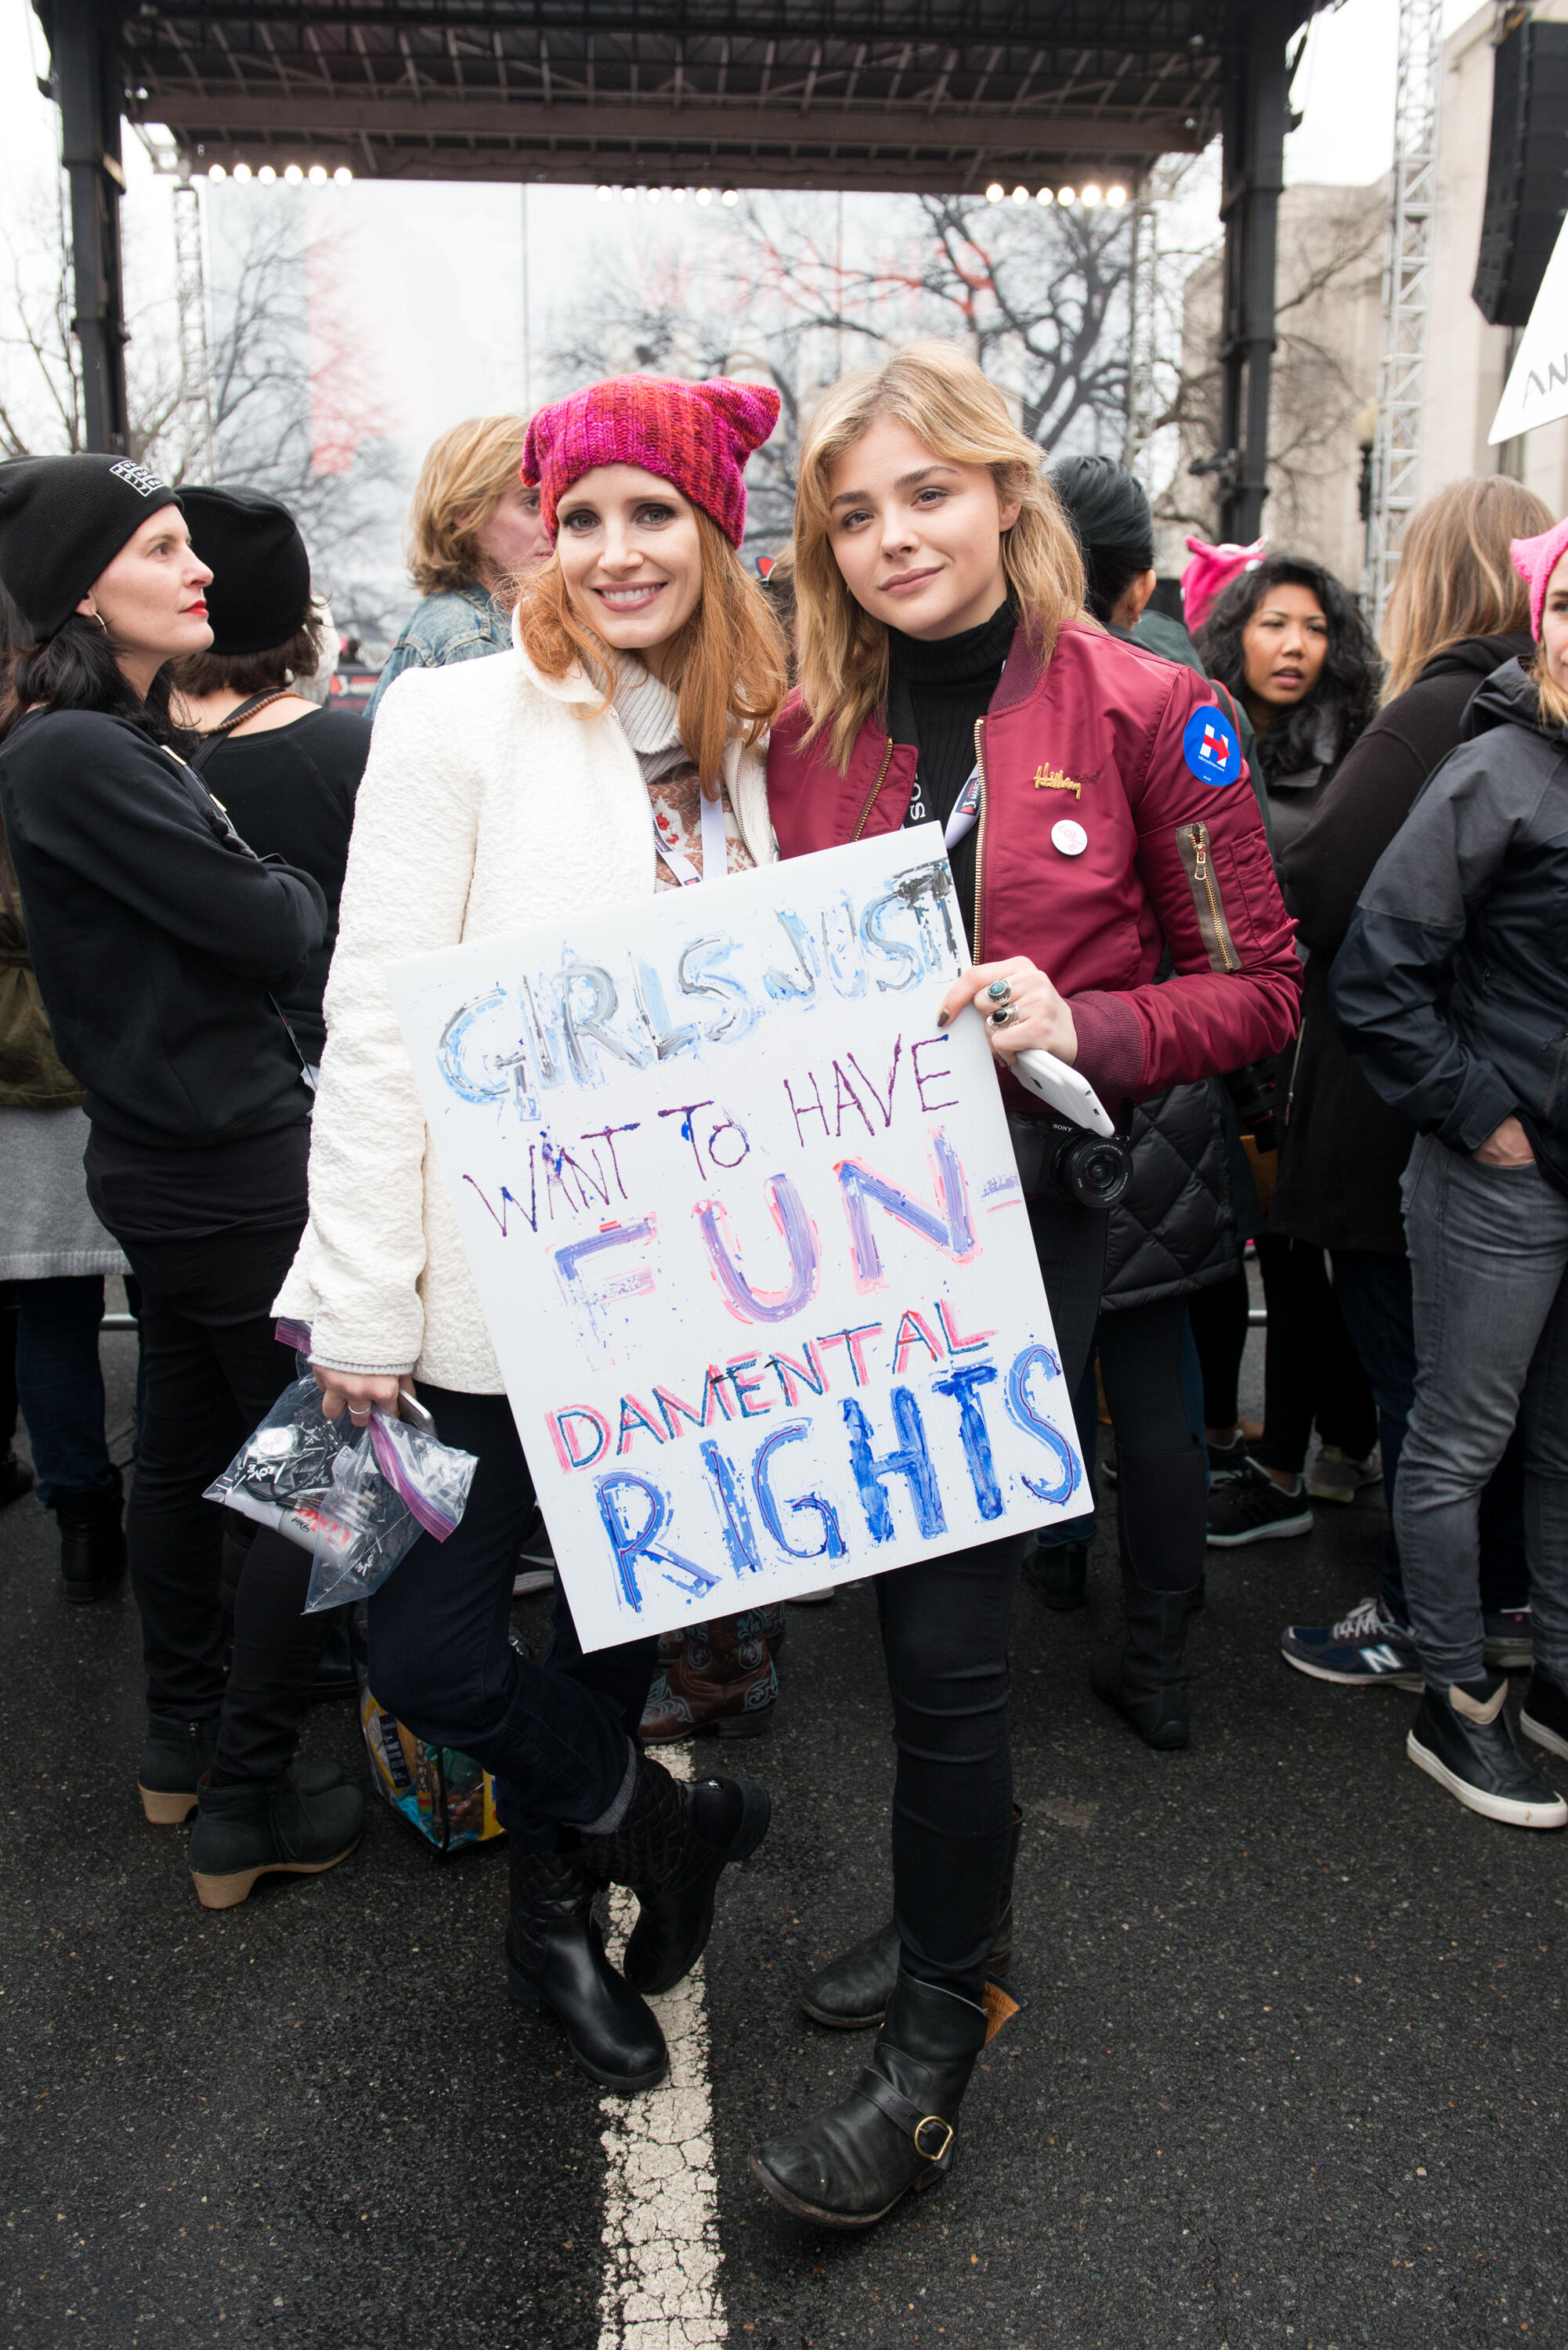 WASHINGTON, DC - JANUARY 21: Jessica Chastain and Chloe Grace Moretz attend the Women's March on Washington on January 21, 2017 in Washington, DC.  (Photo by Noam Galai/WireImage)